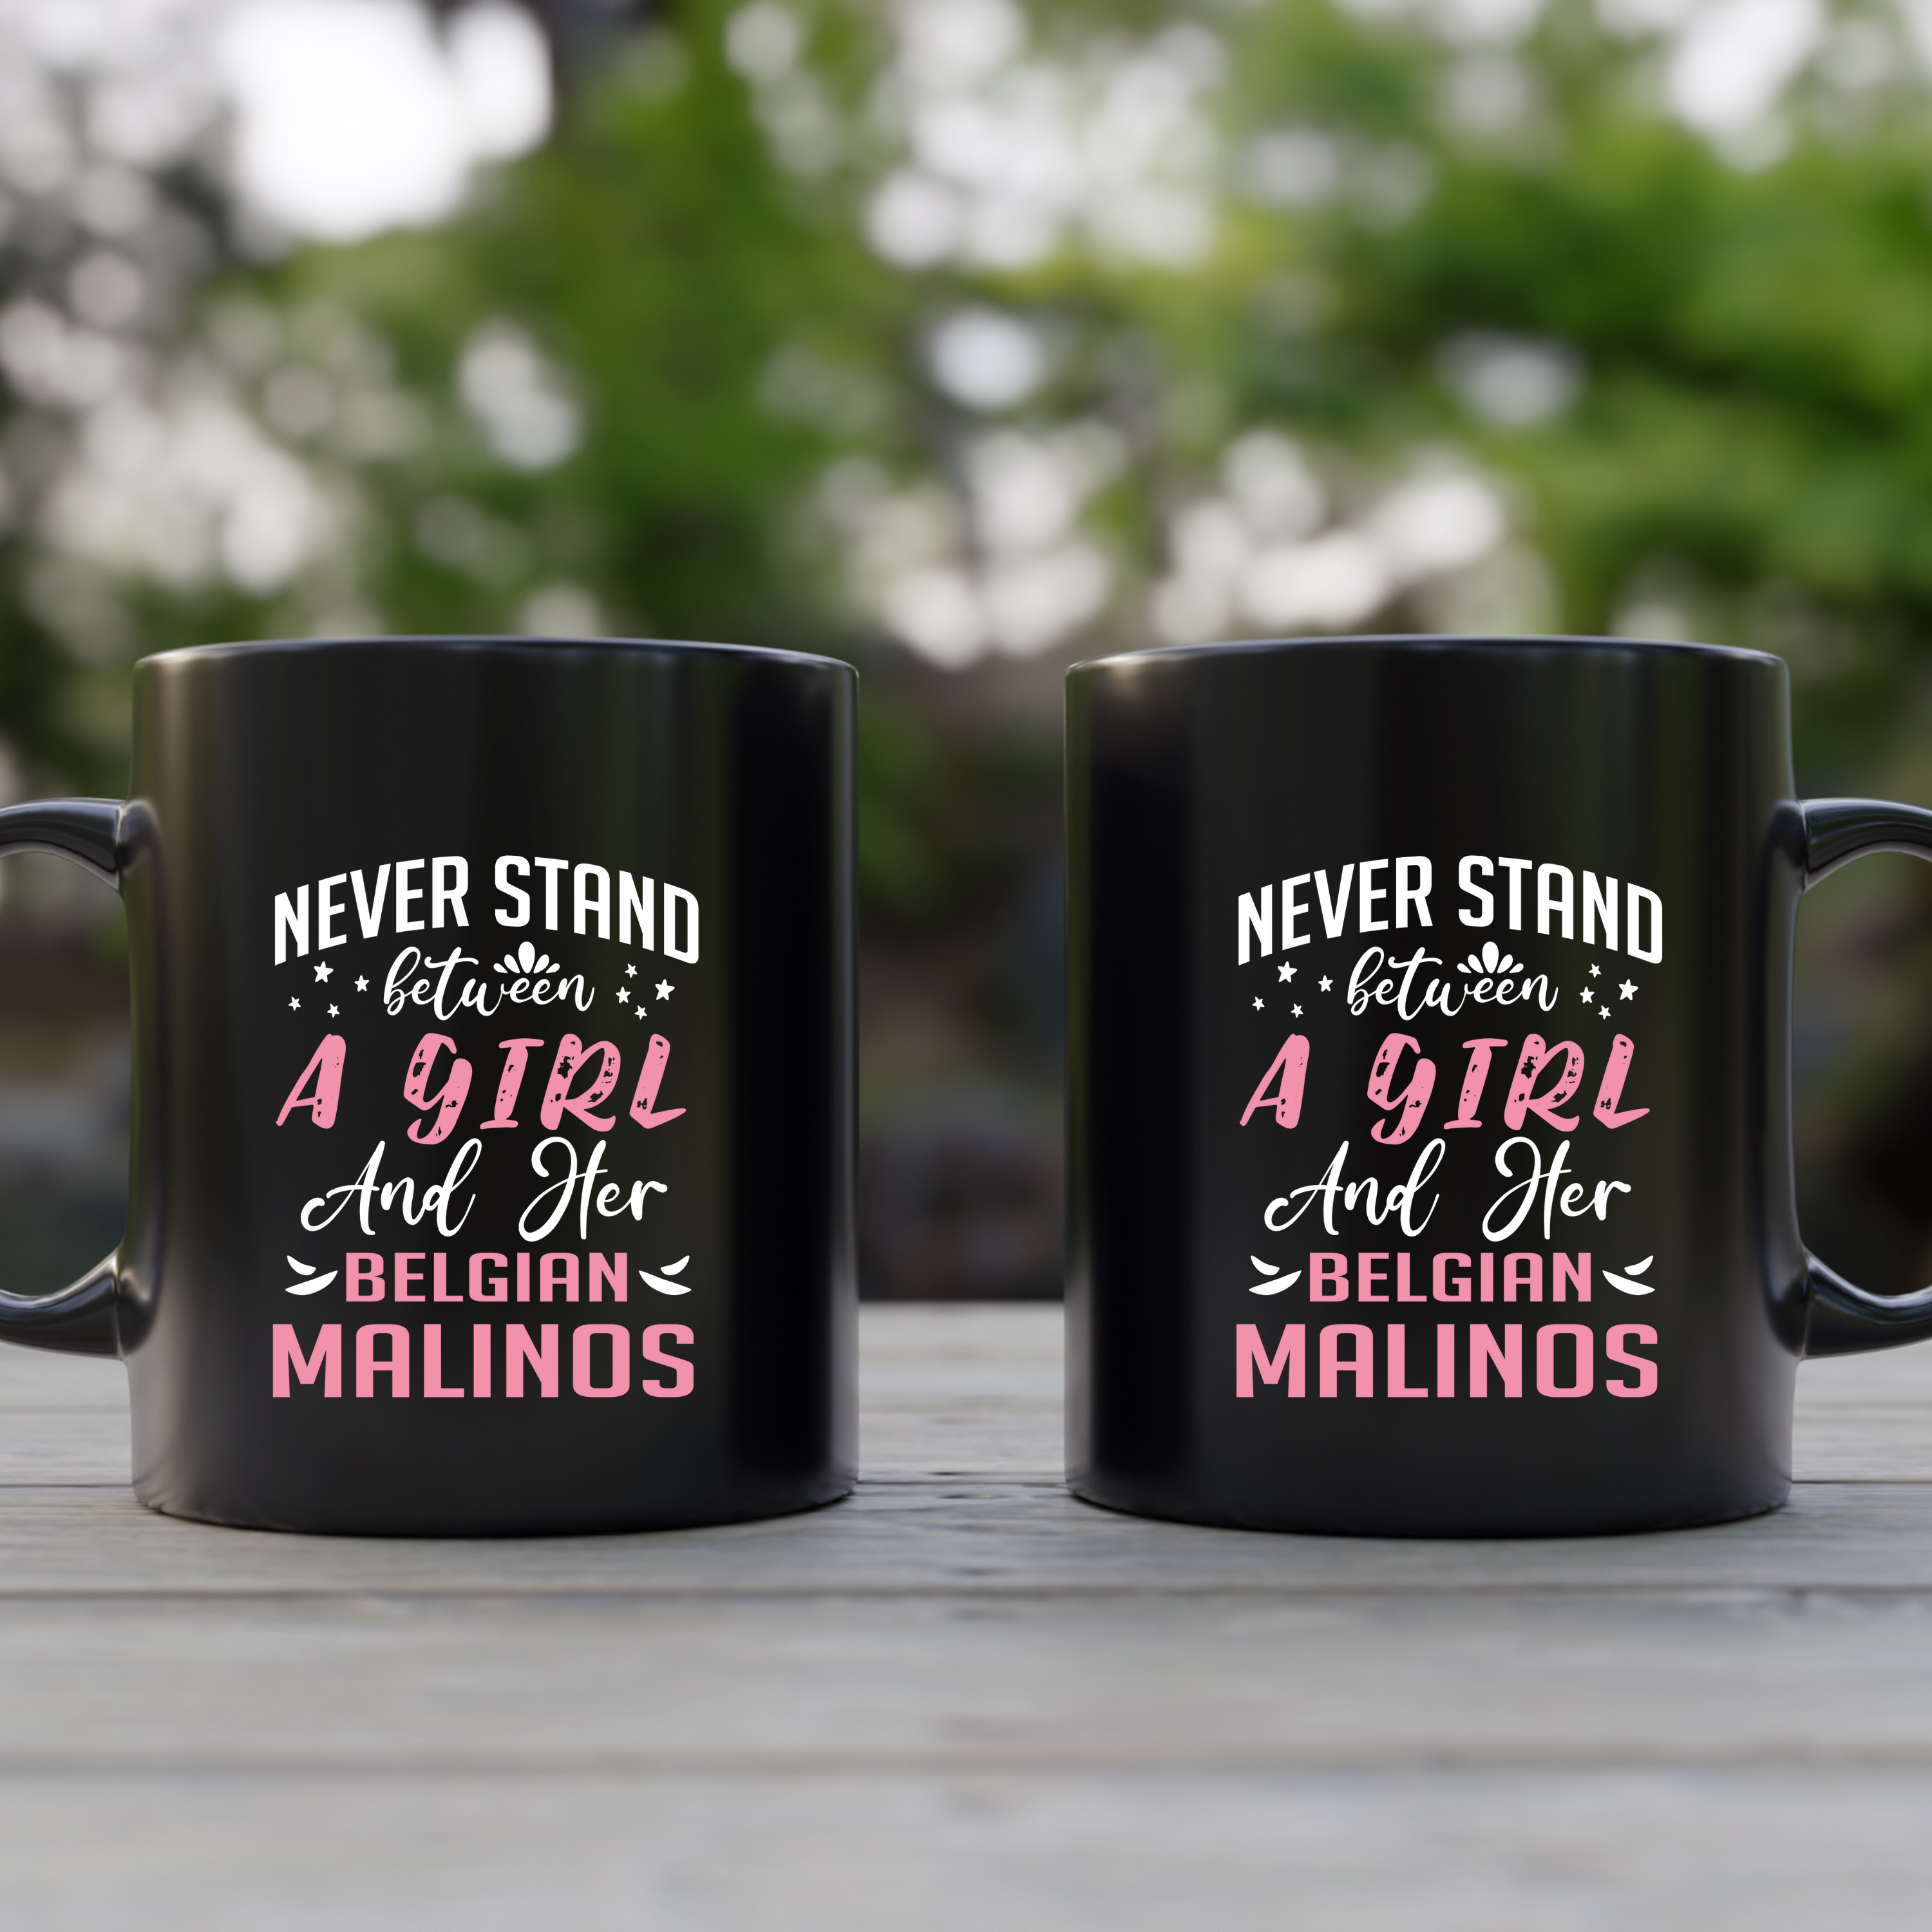 Never Stand Between a Girl and Her Malinois 11oz Black Ceramic Mug - Dog Lover Coffee Cup